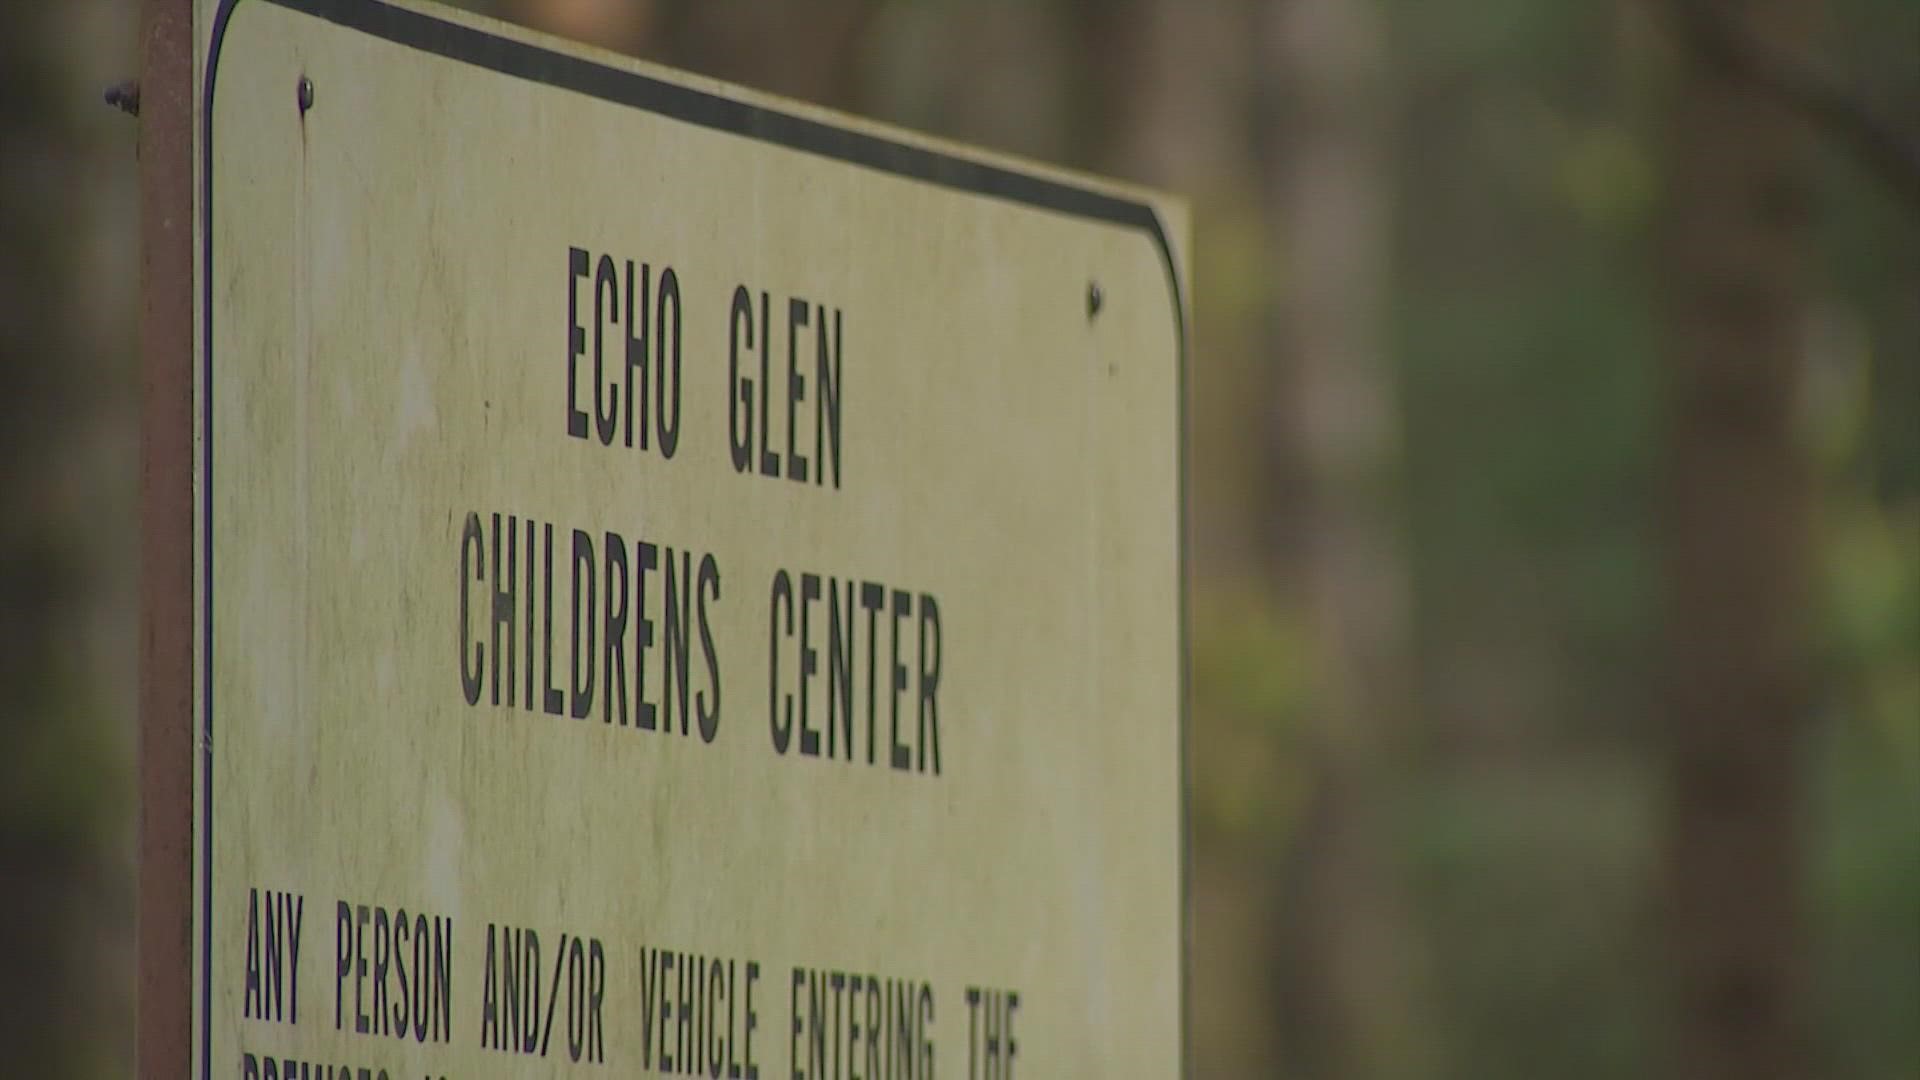 Five teens overpowered staff and escaped from the Echo Glen Children's Center on Jan. 26.